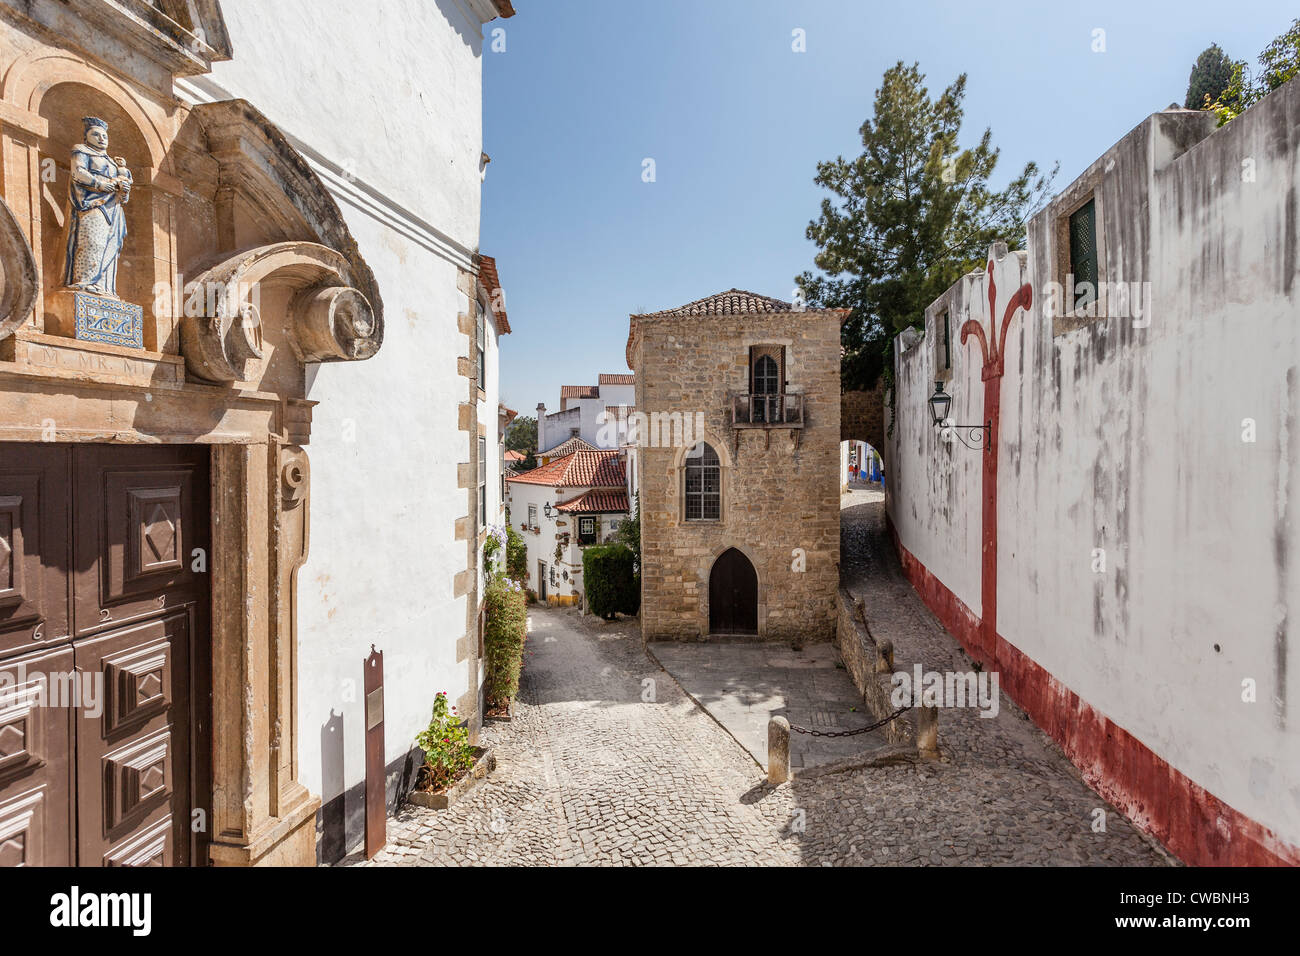 Medieval Synagogue (back) and Misericordia Church Portal (16th century - Renaissance/Mannerist) in Óbidos, Portugal. Stock Photo